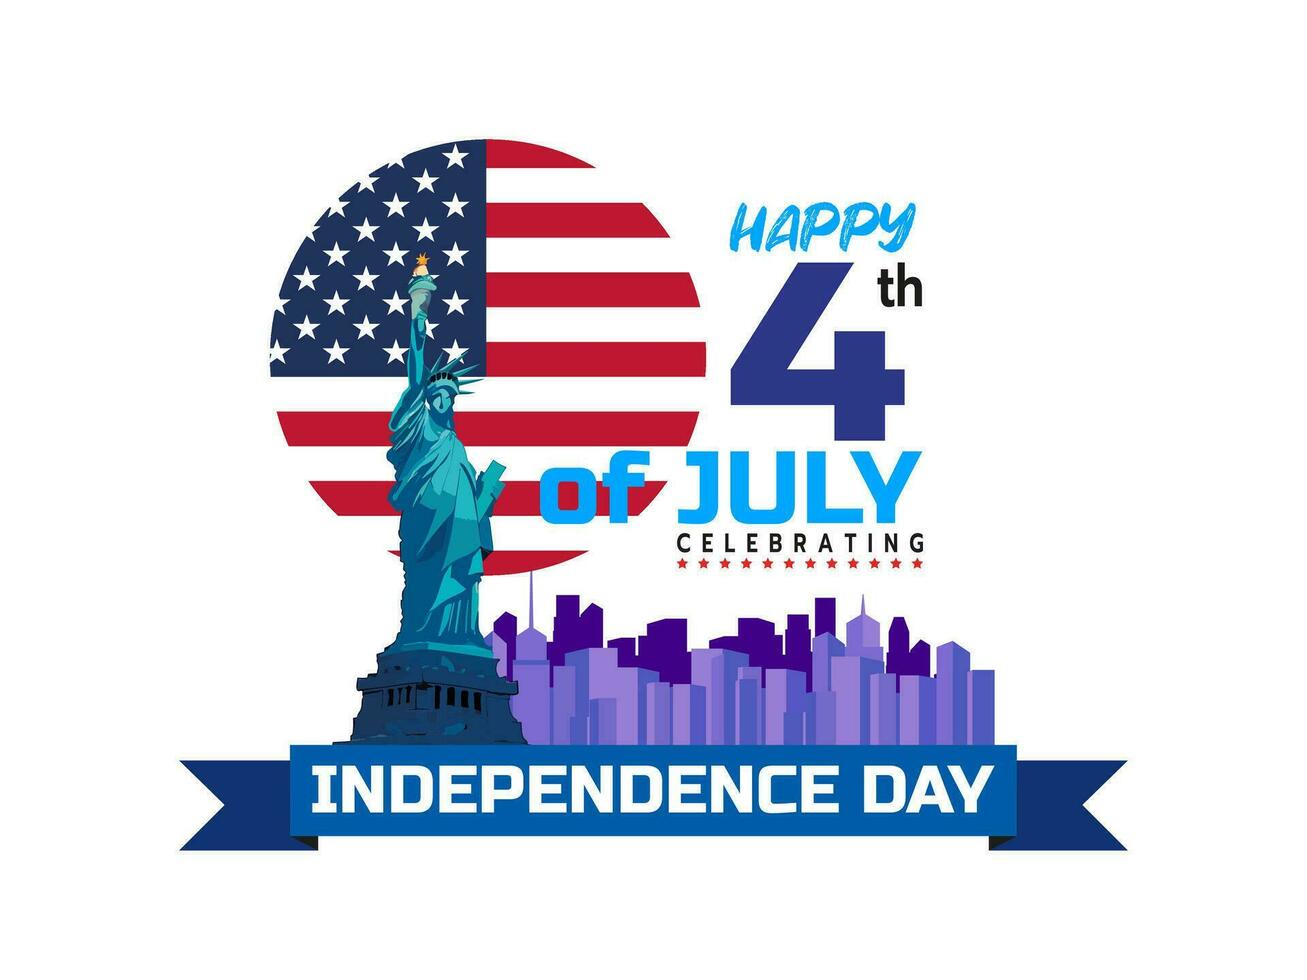 Happy independence day. 4 th july. It is the day celebrate Independence Day, happy holiday vector